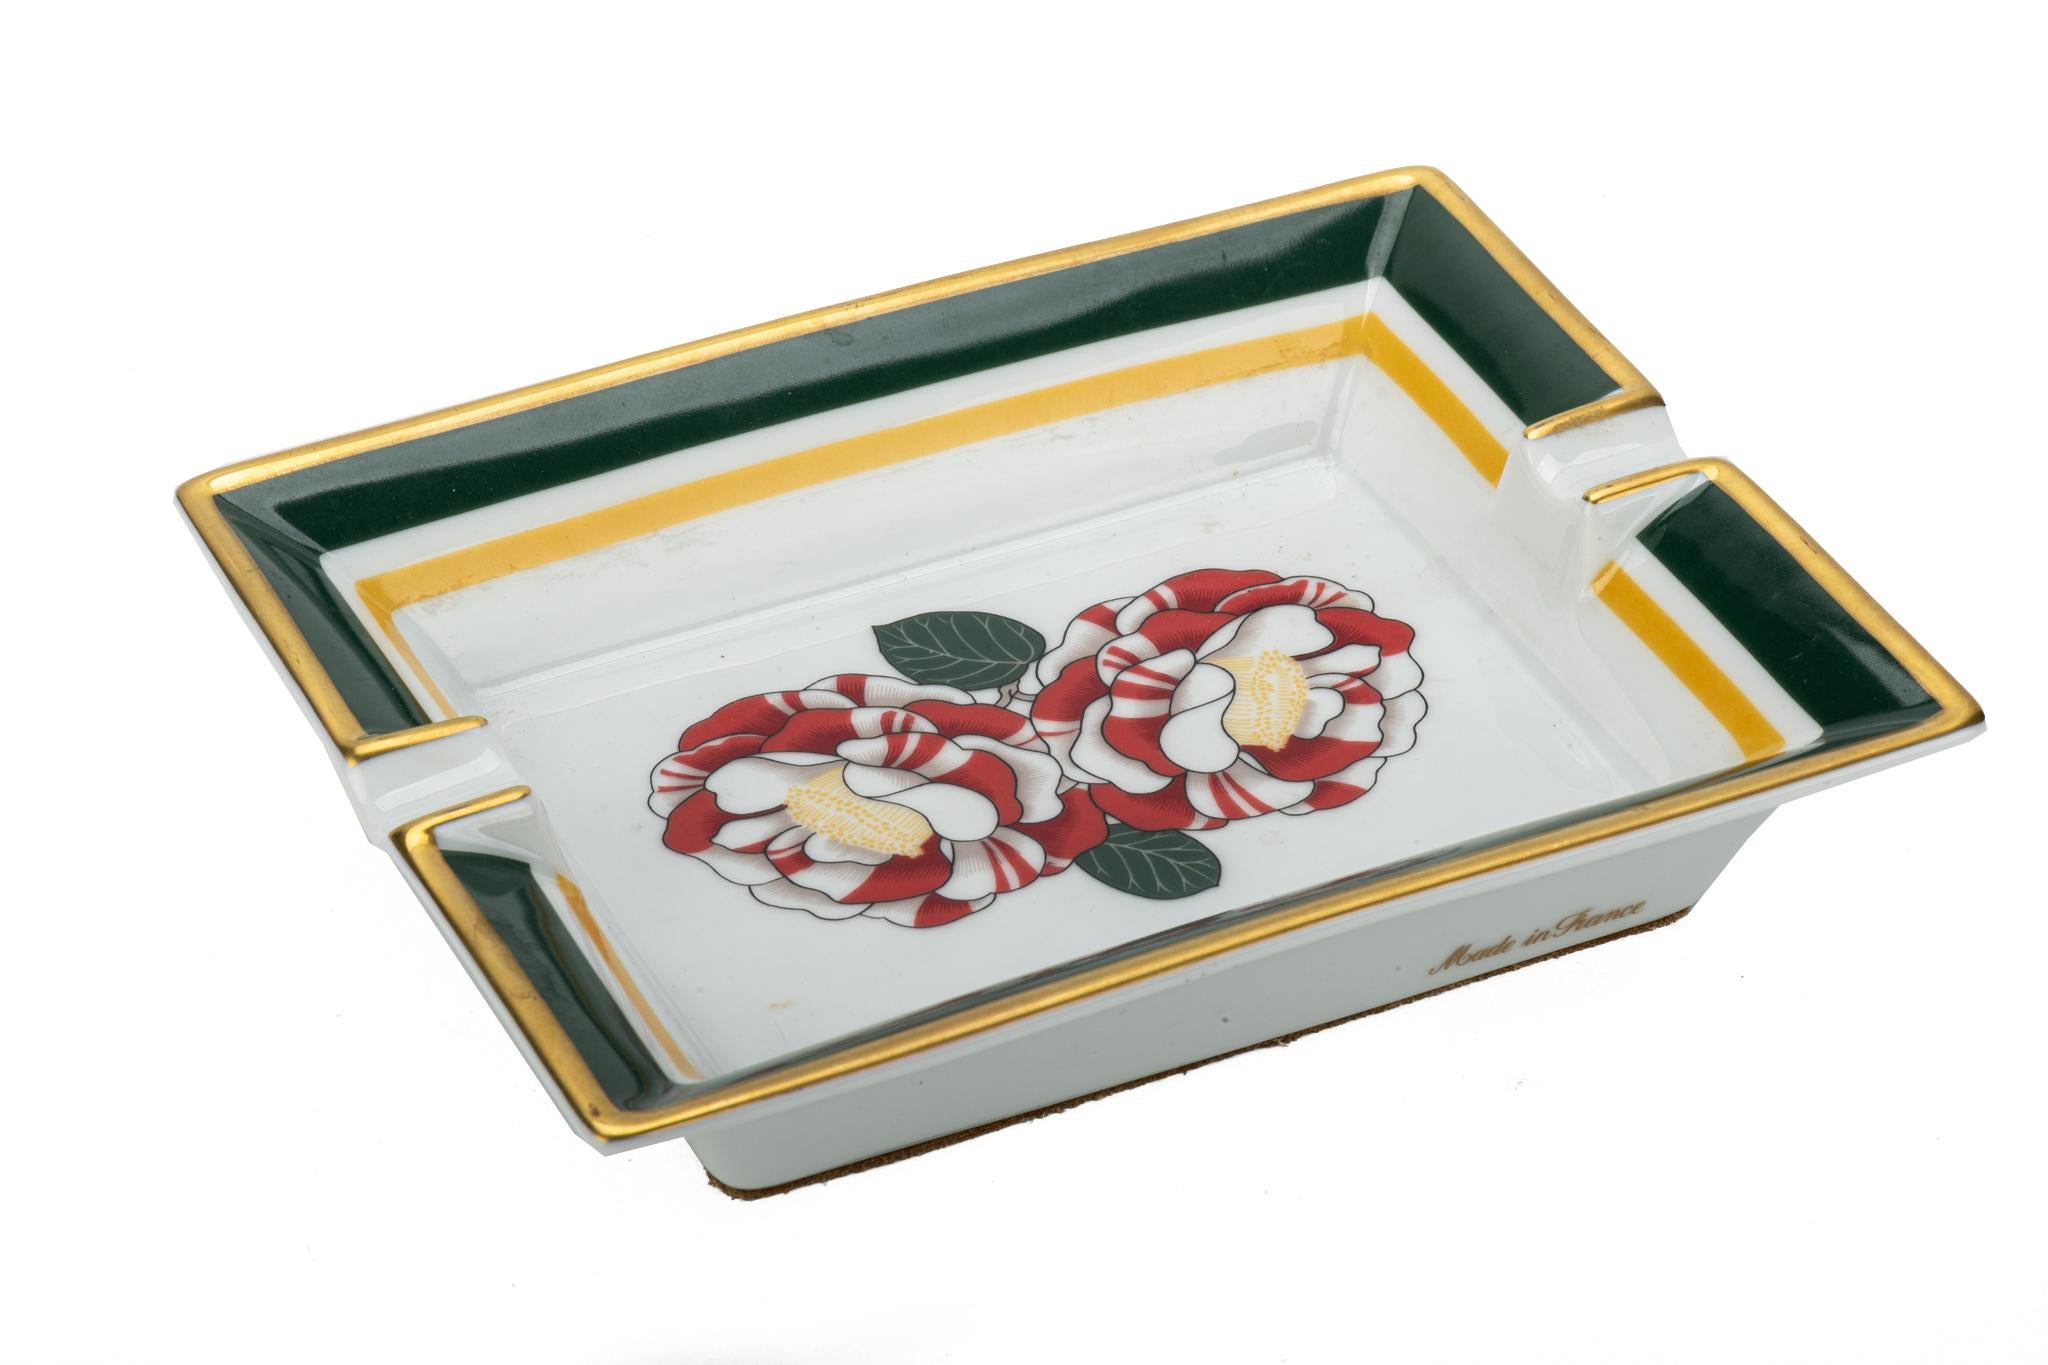 Hermès rectangular camelia design porcelain ashtray. Red, white and green combination. Excellent condition.